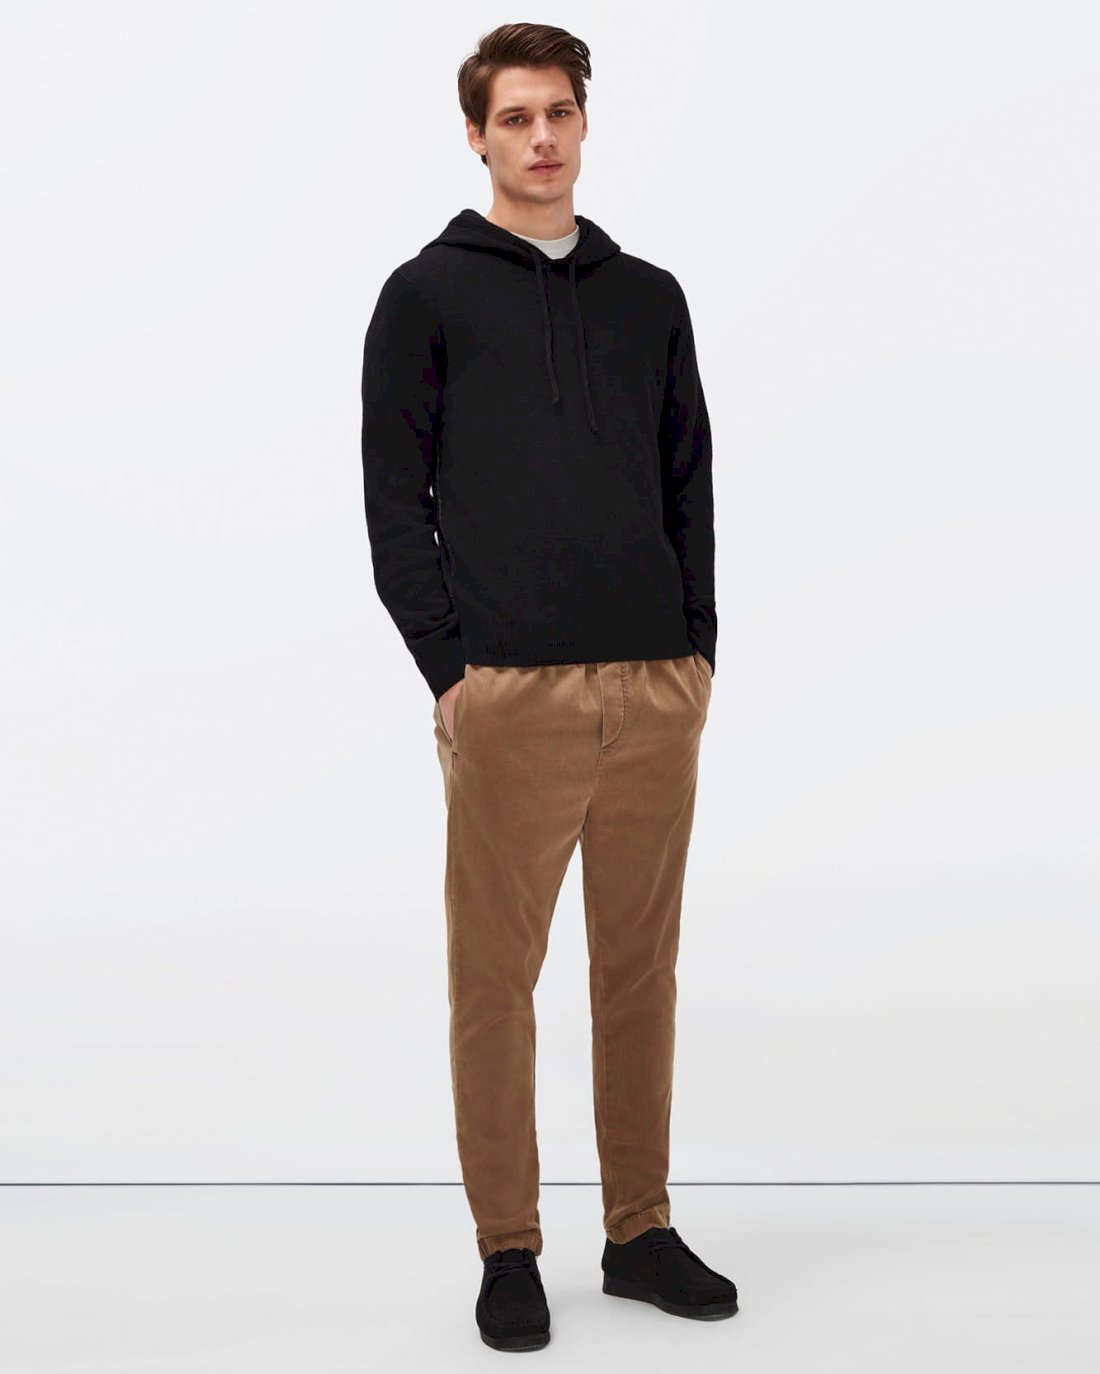 Warm Twill Jogger Chino in Camel | 7 For All Mankind